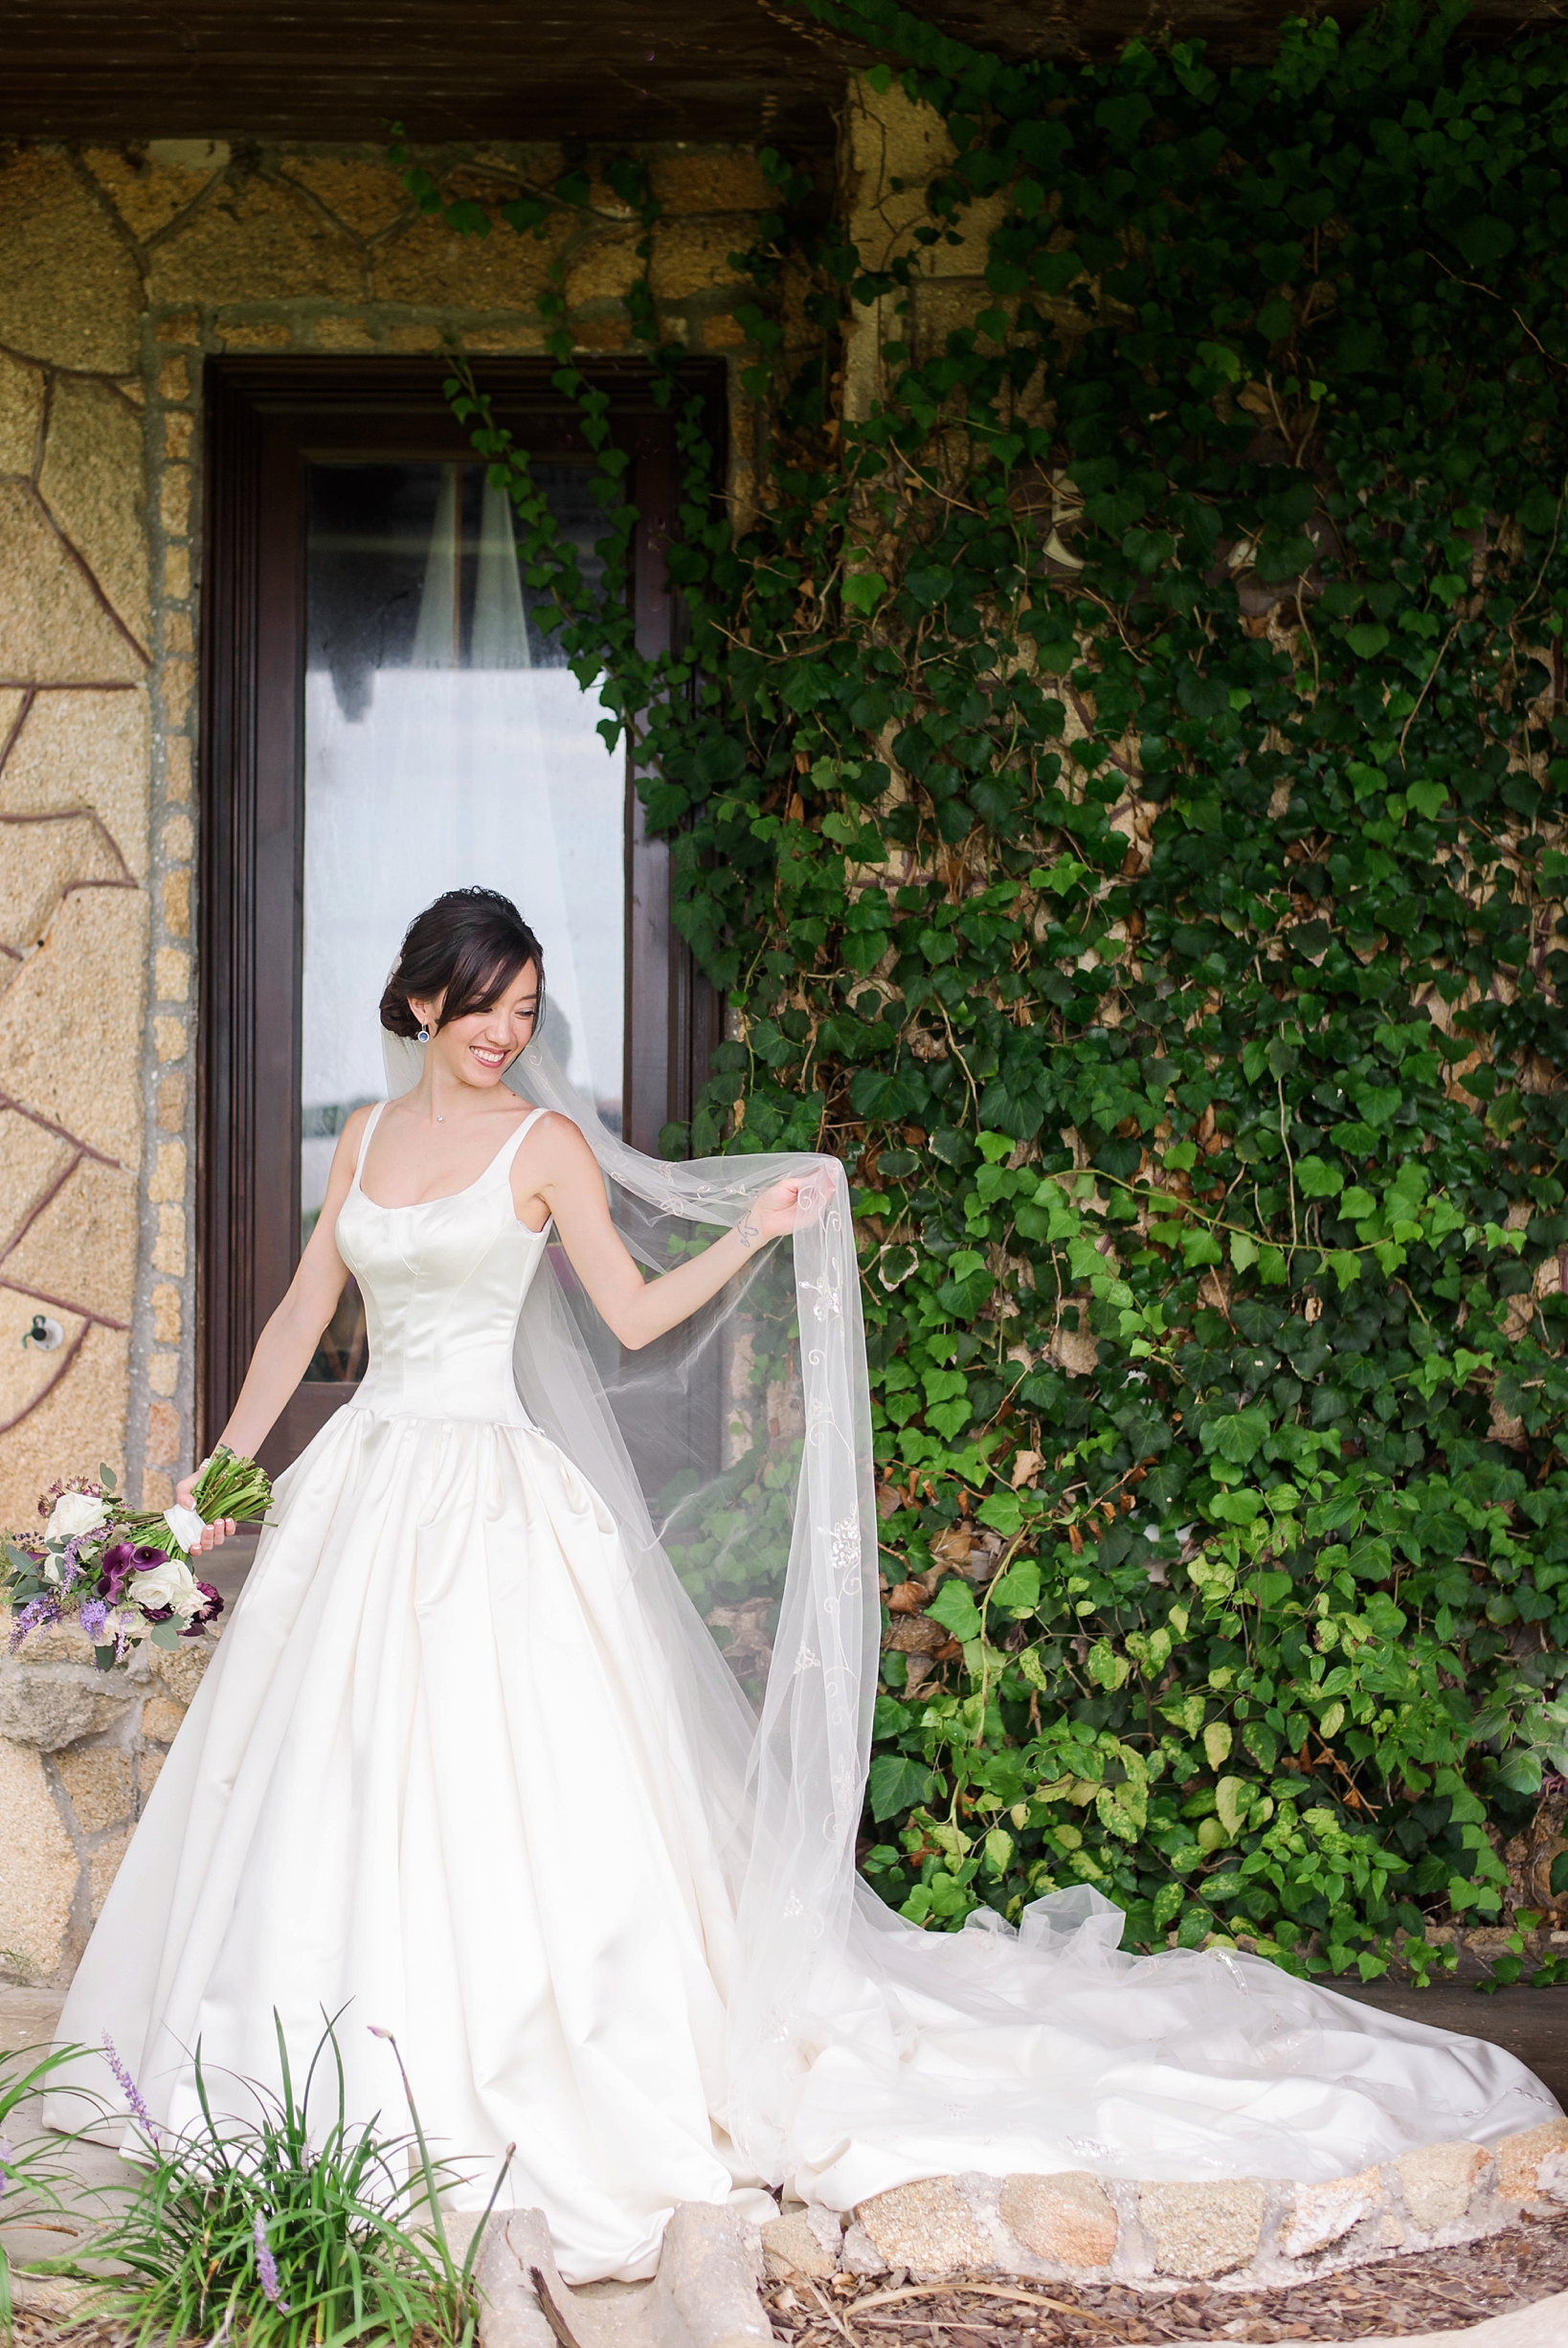 The bride holding her cathedral veil in one hand and her bouquet in the other by Sarah & Ben Photography